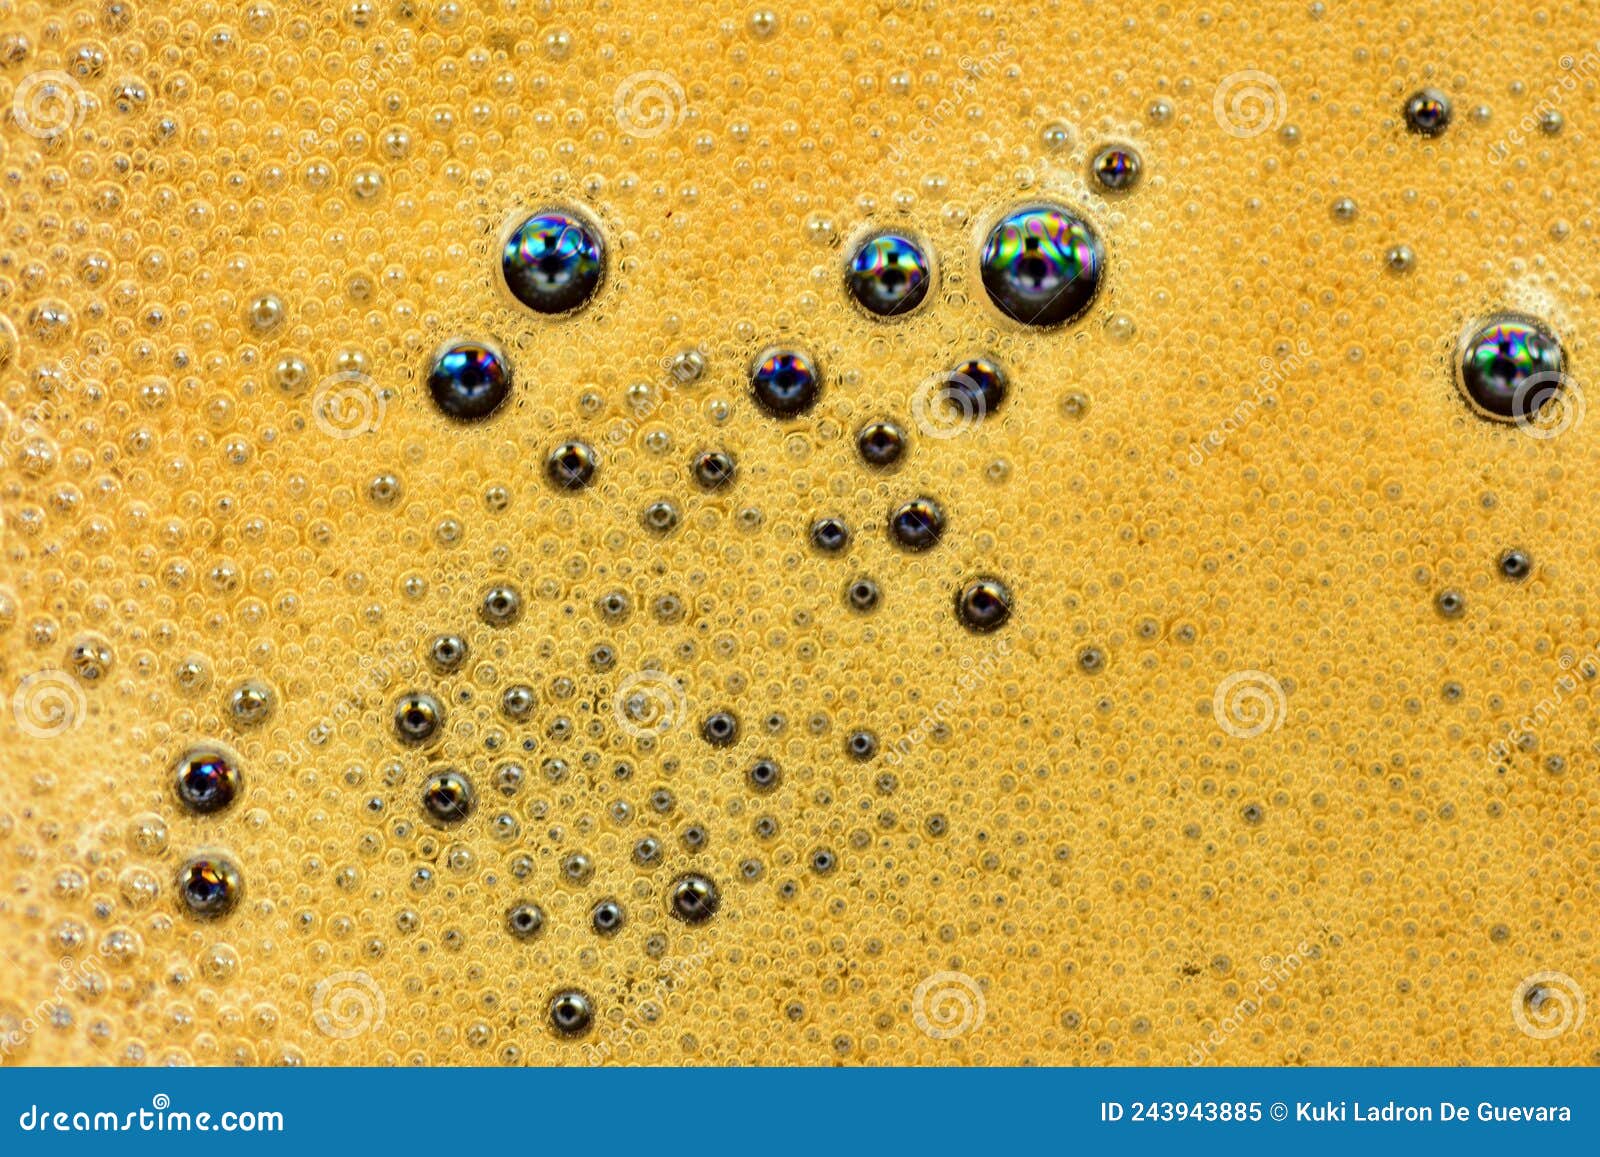 detail of the foam of an espresso coffee